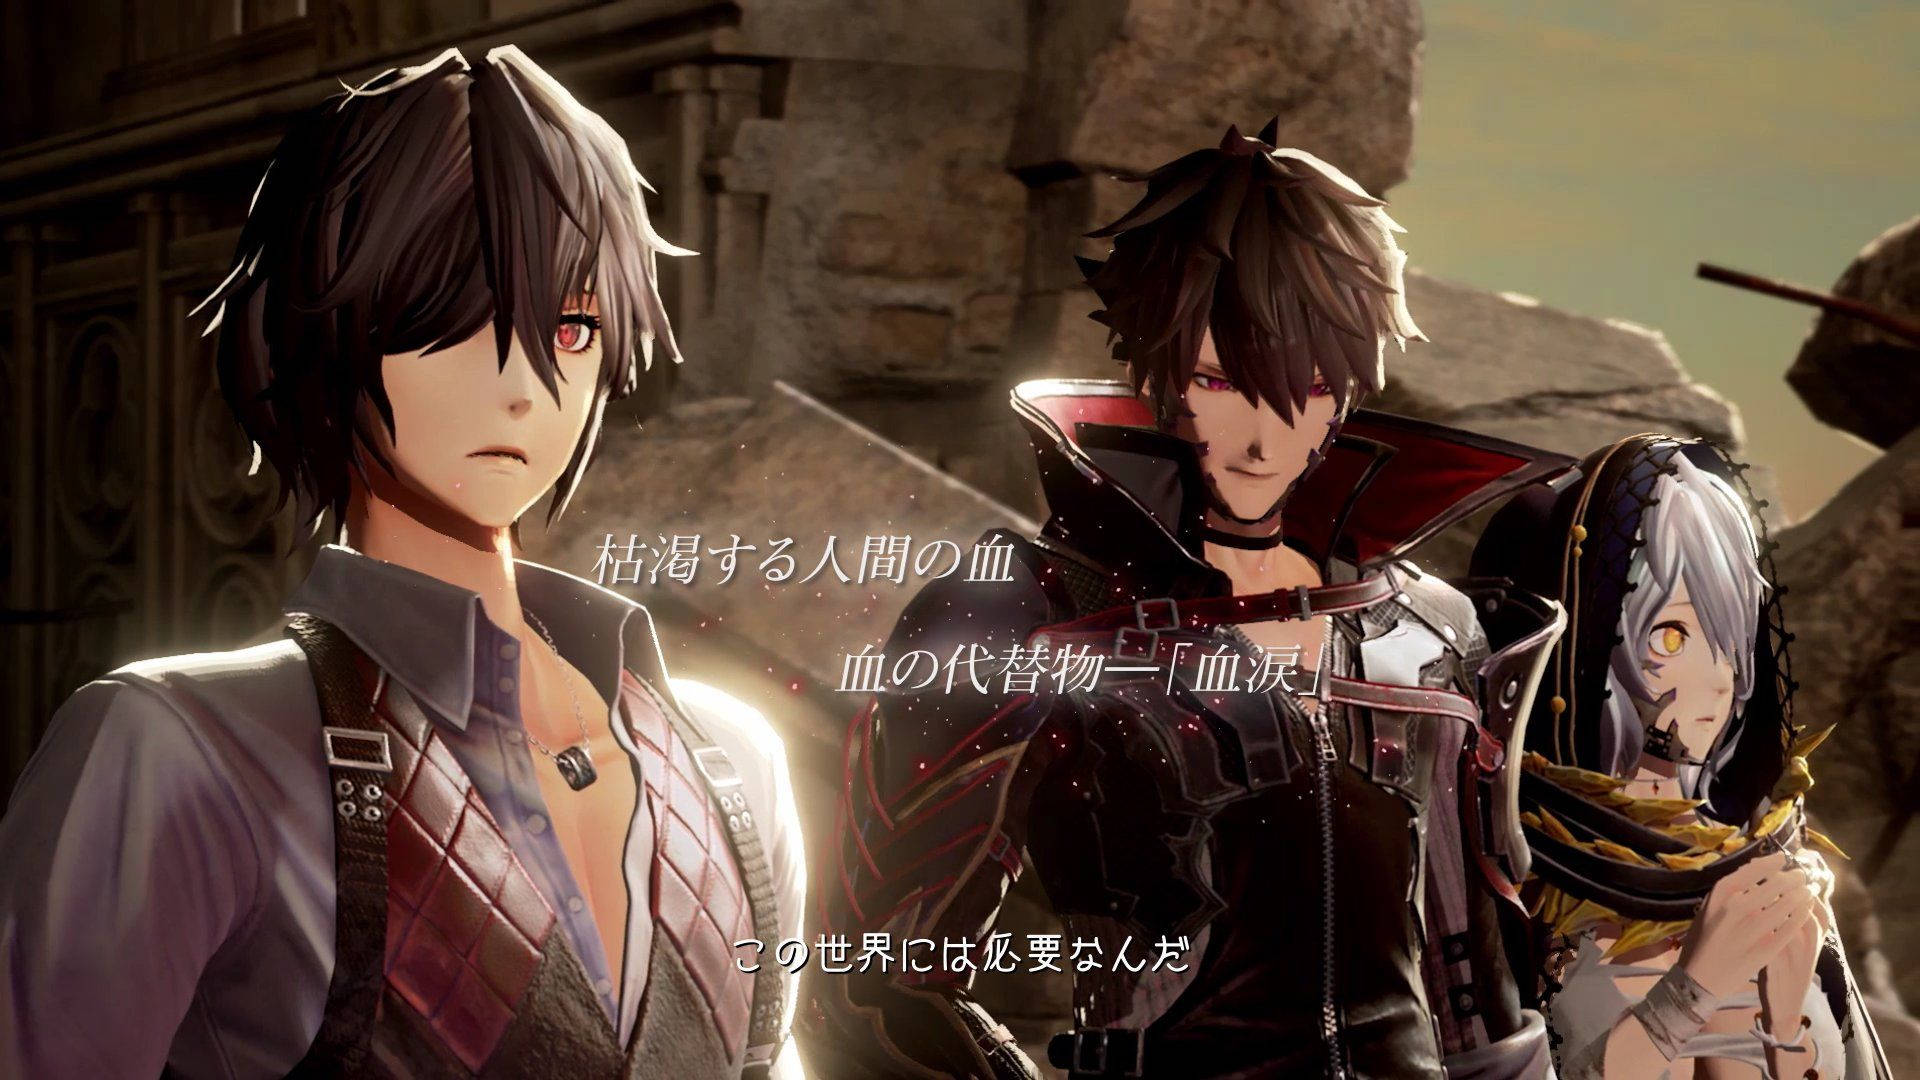 Code Vein Release Date To Be Announced On June 4 Background